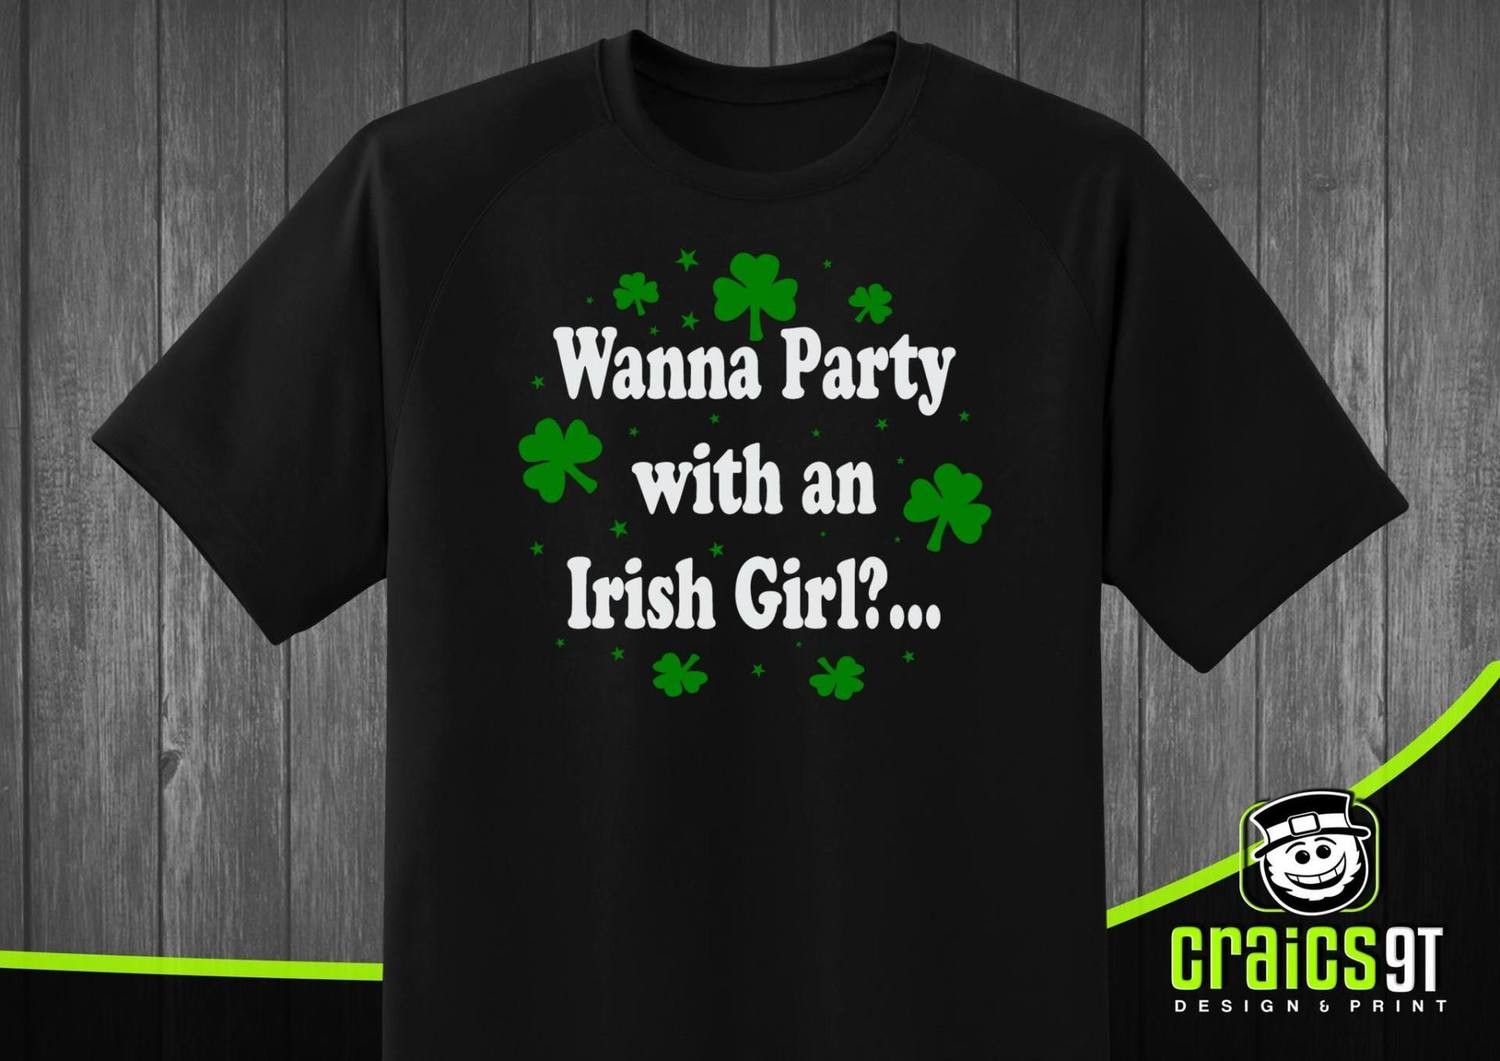 Wanna Party with an Irish Girl?